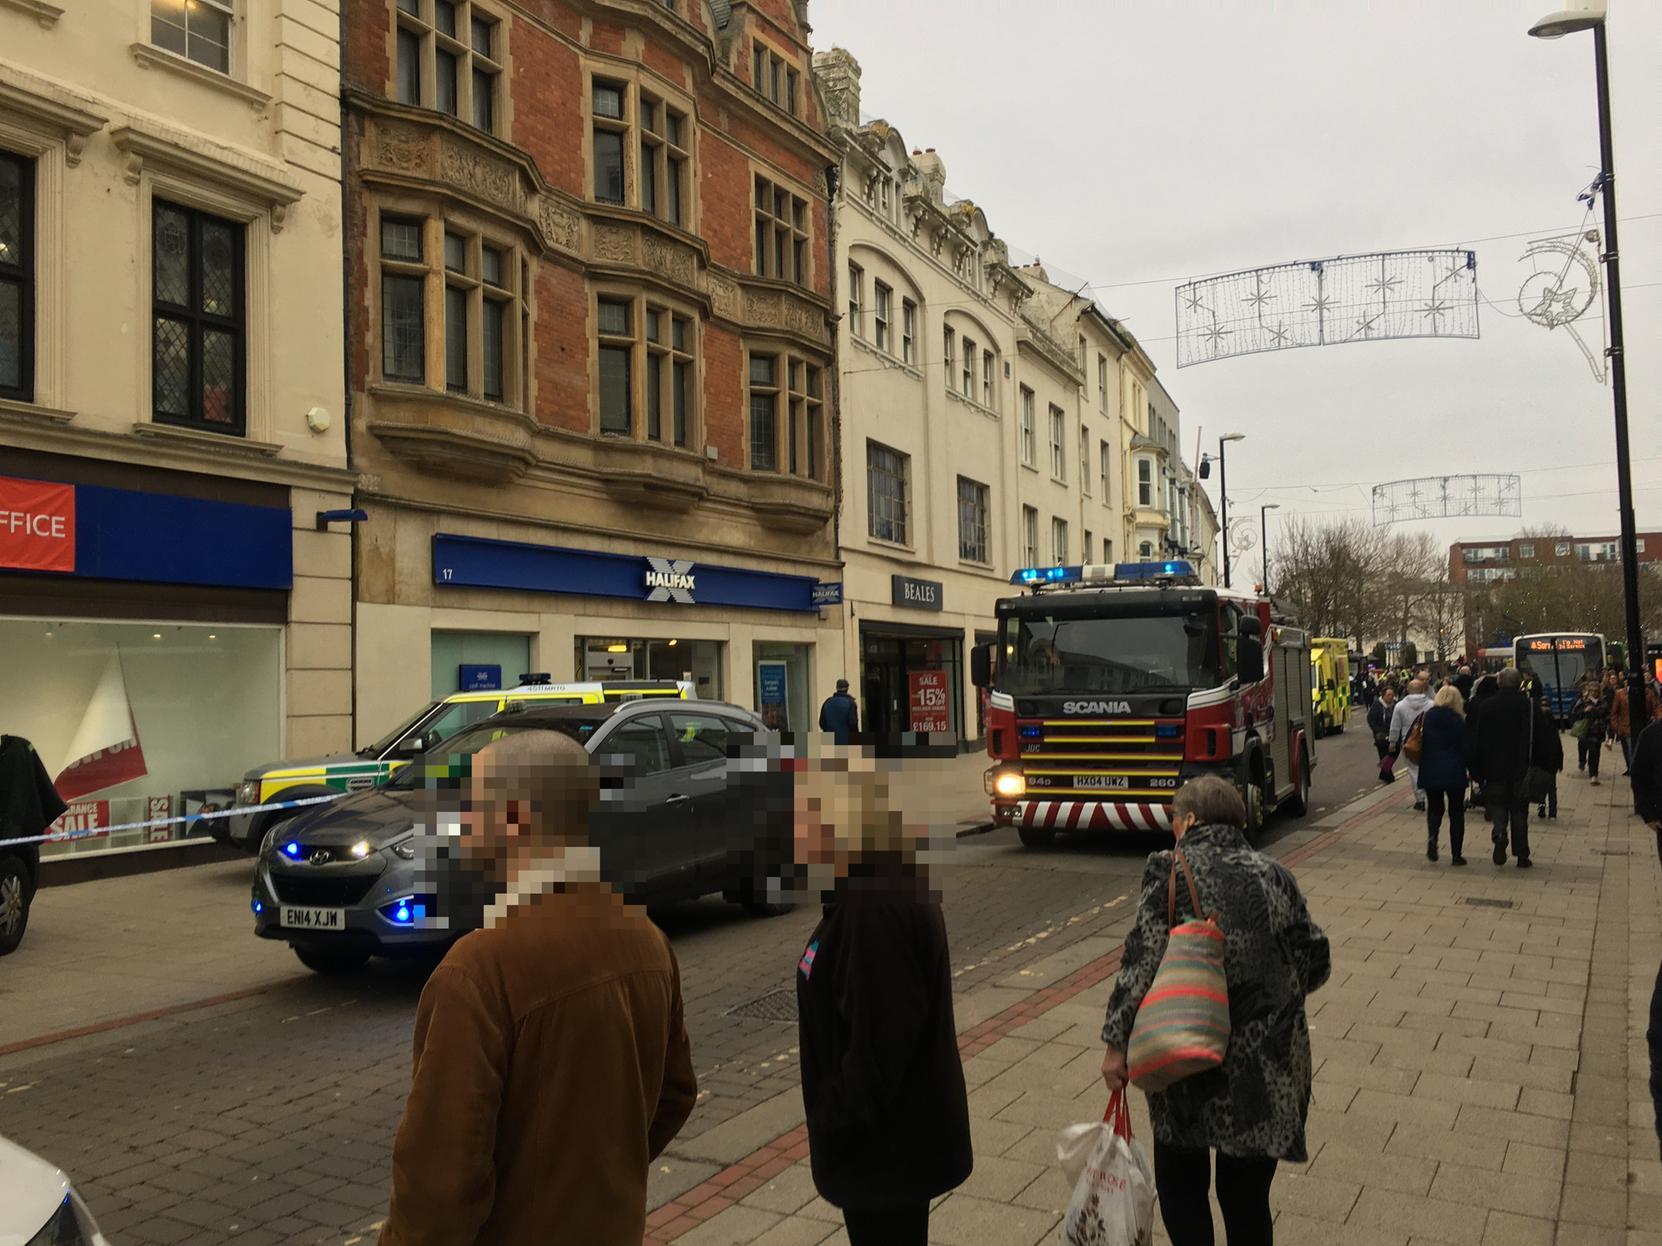 The scene of the incident in South Street, Worthing